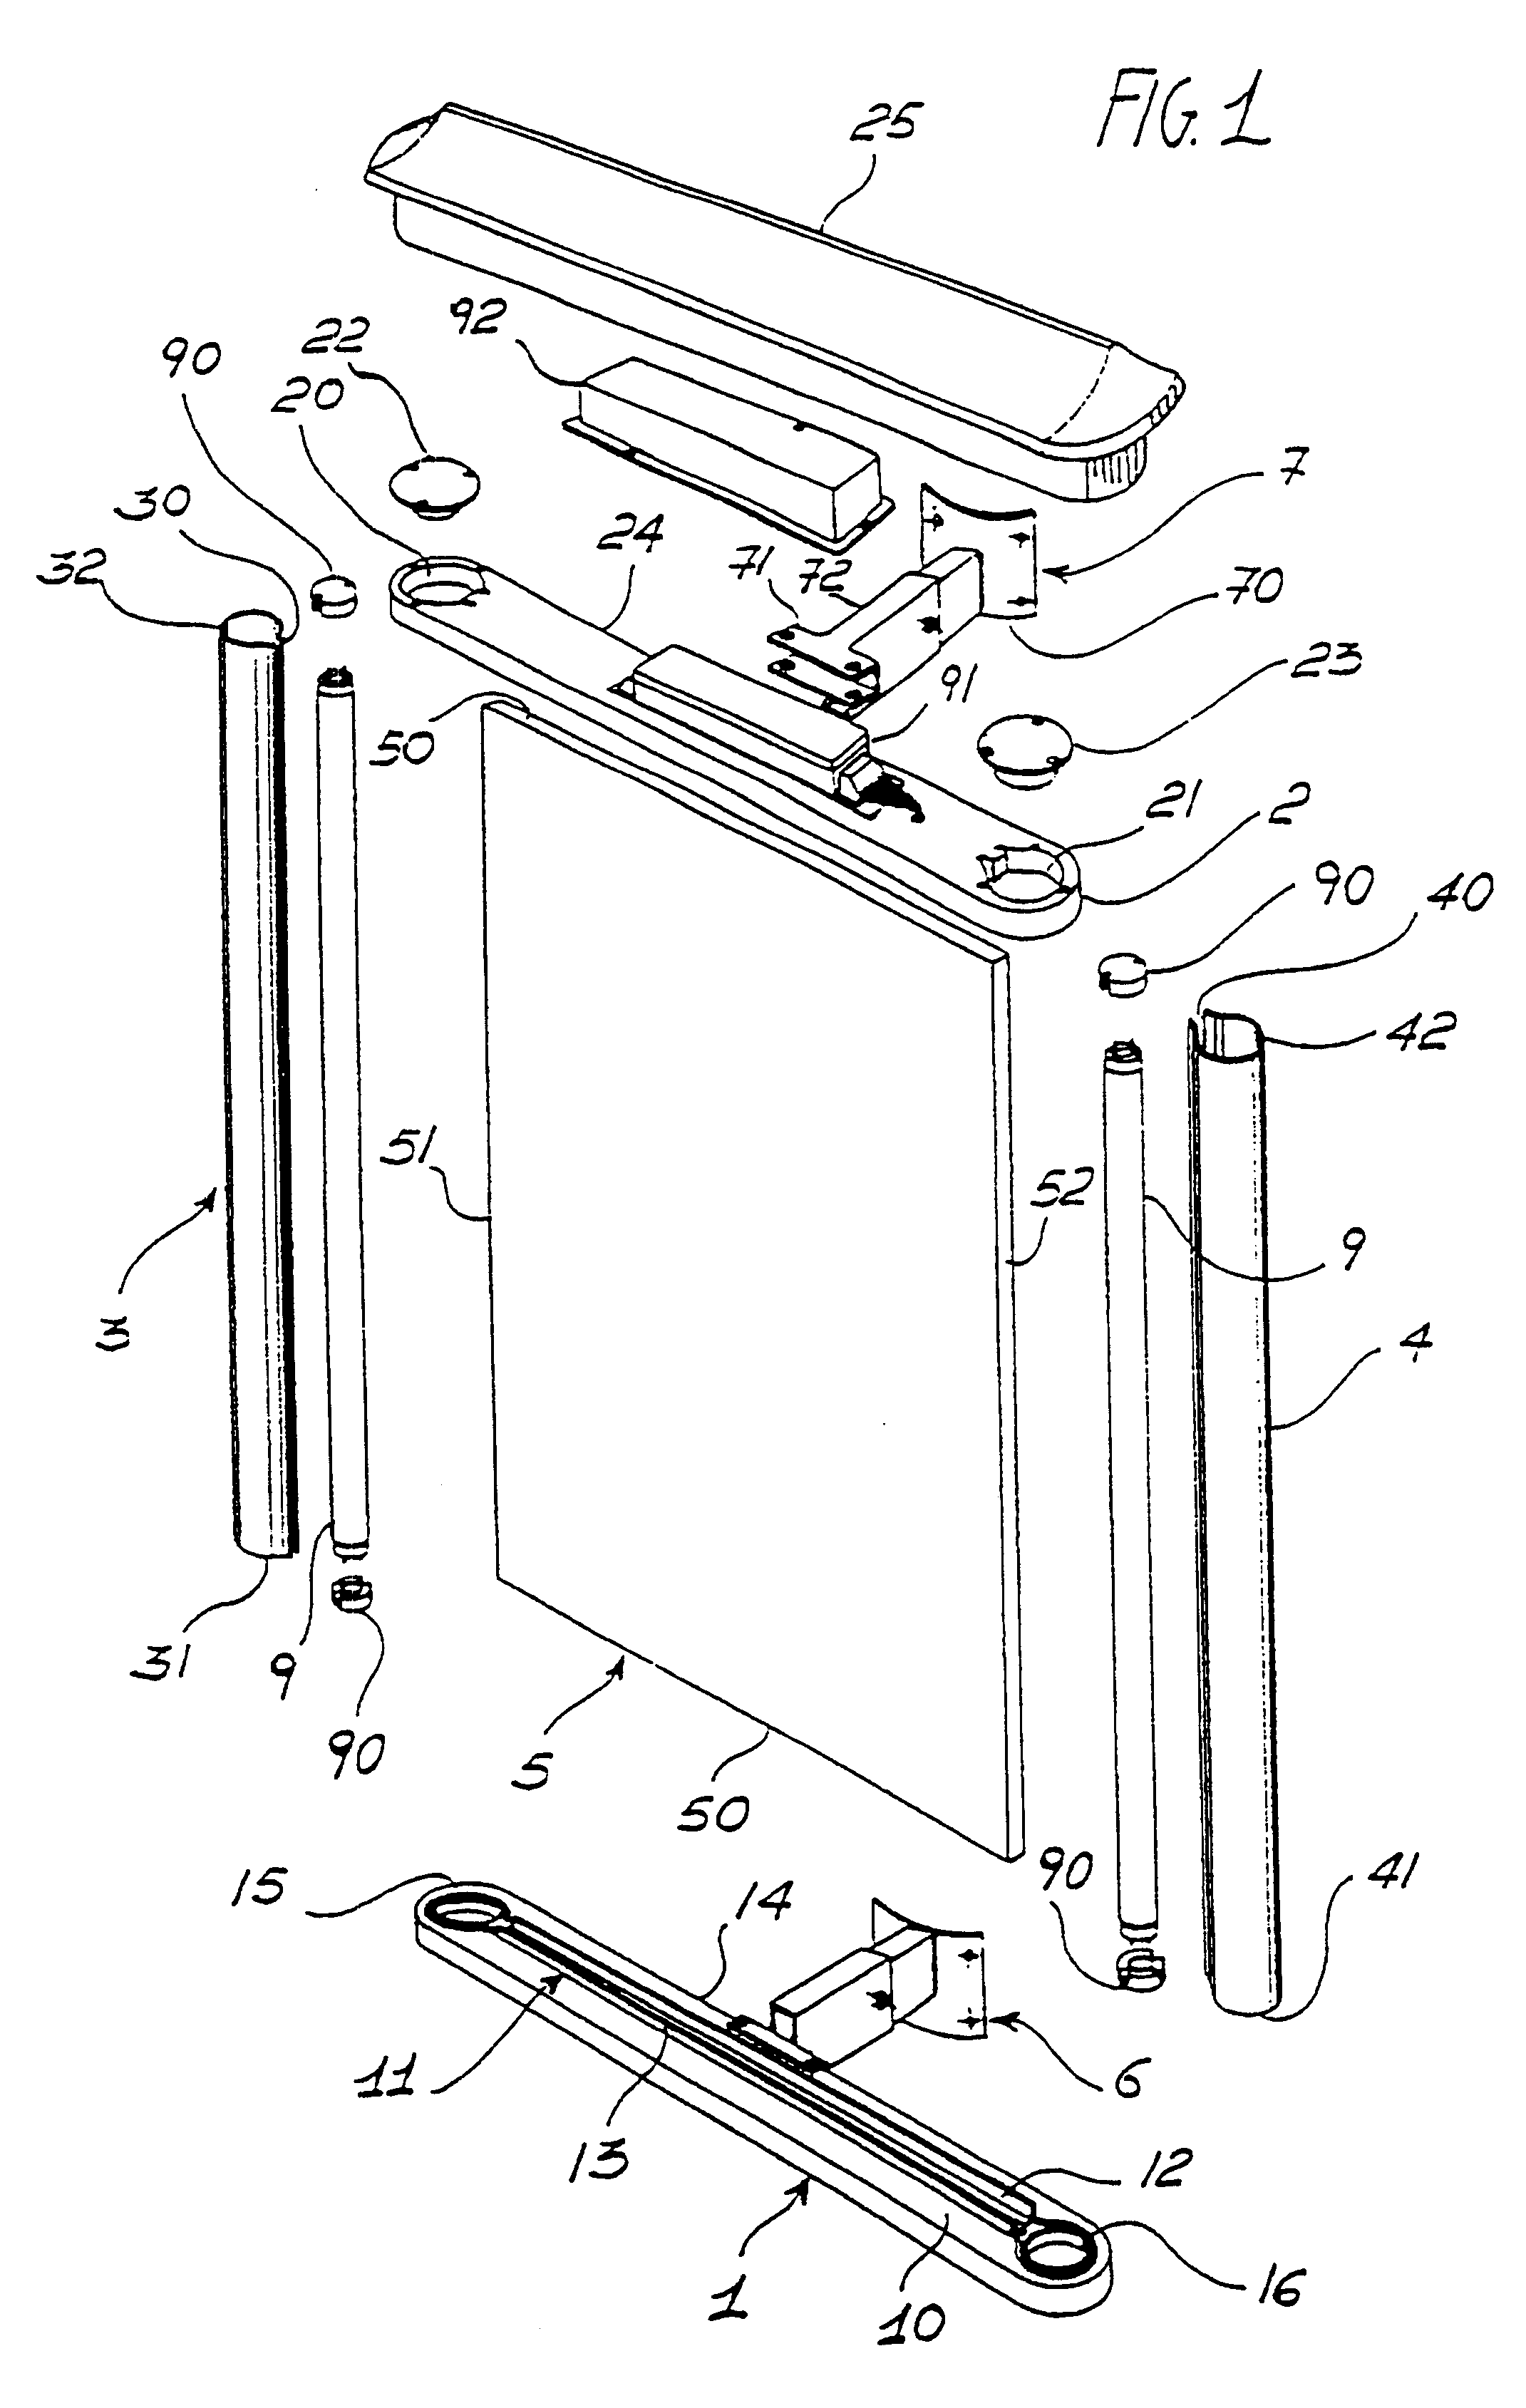 Lighted panel device able to be applied onto posts